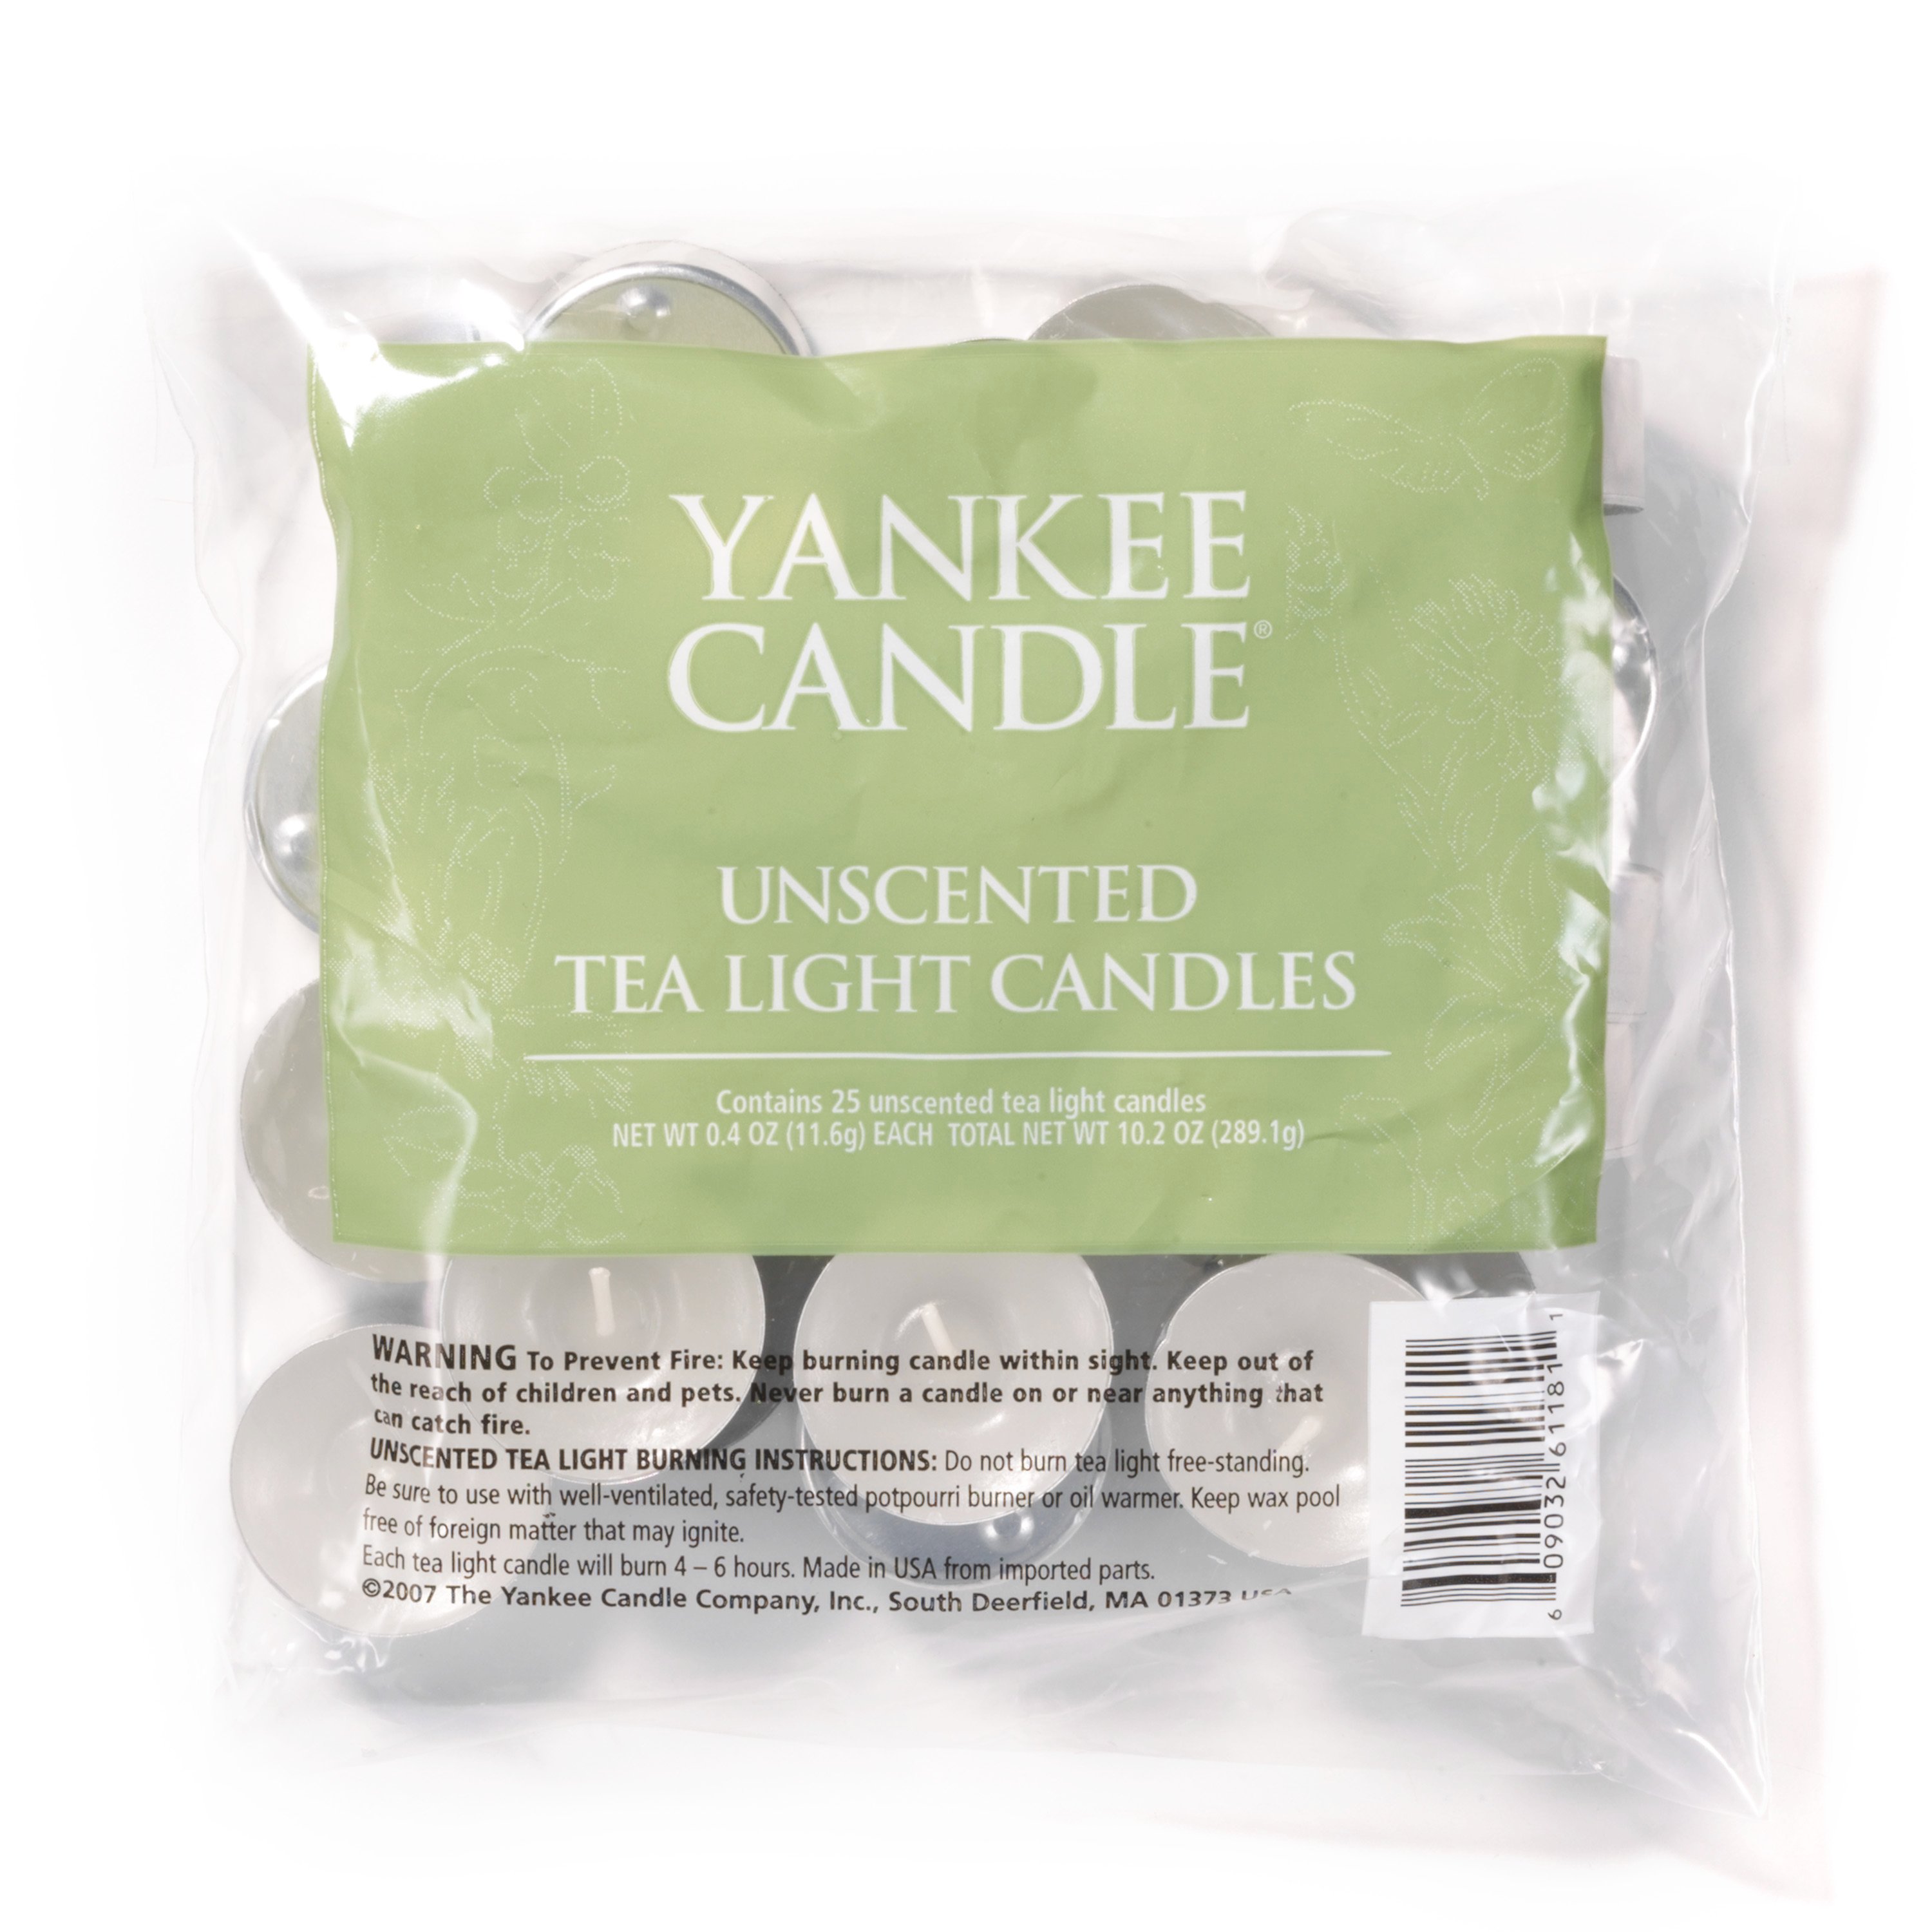 Yankee Candle Box of 12 Scented Tea Light Candles New Discontinued Free Shipping 